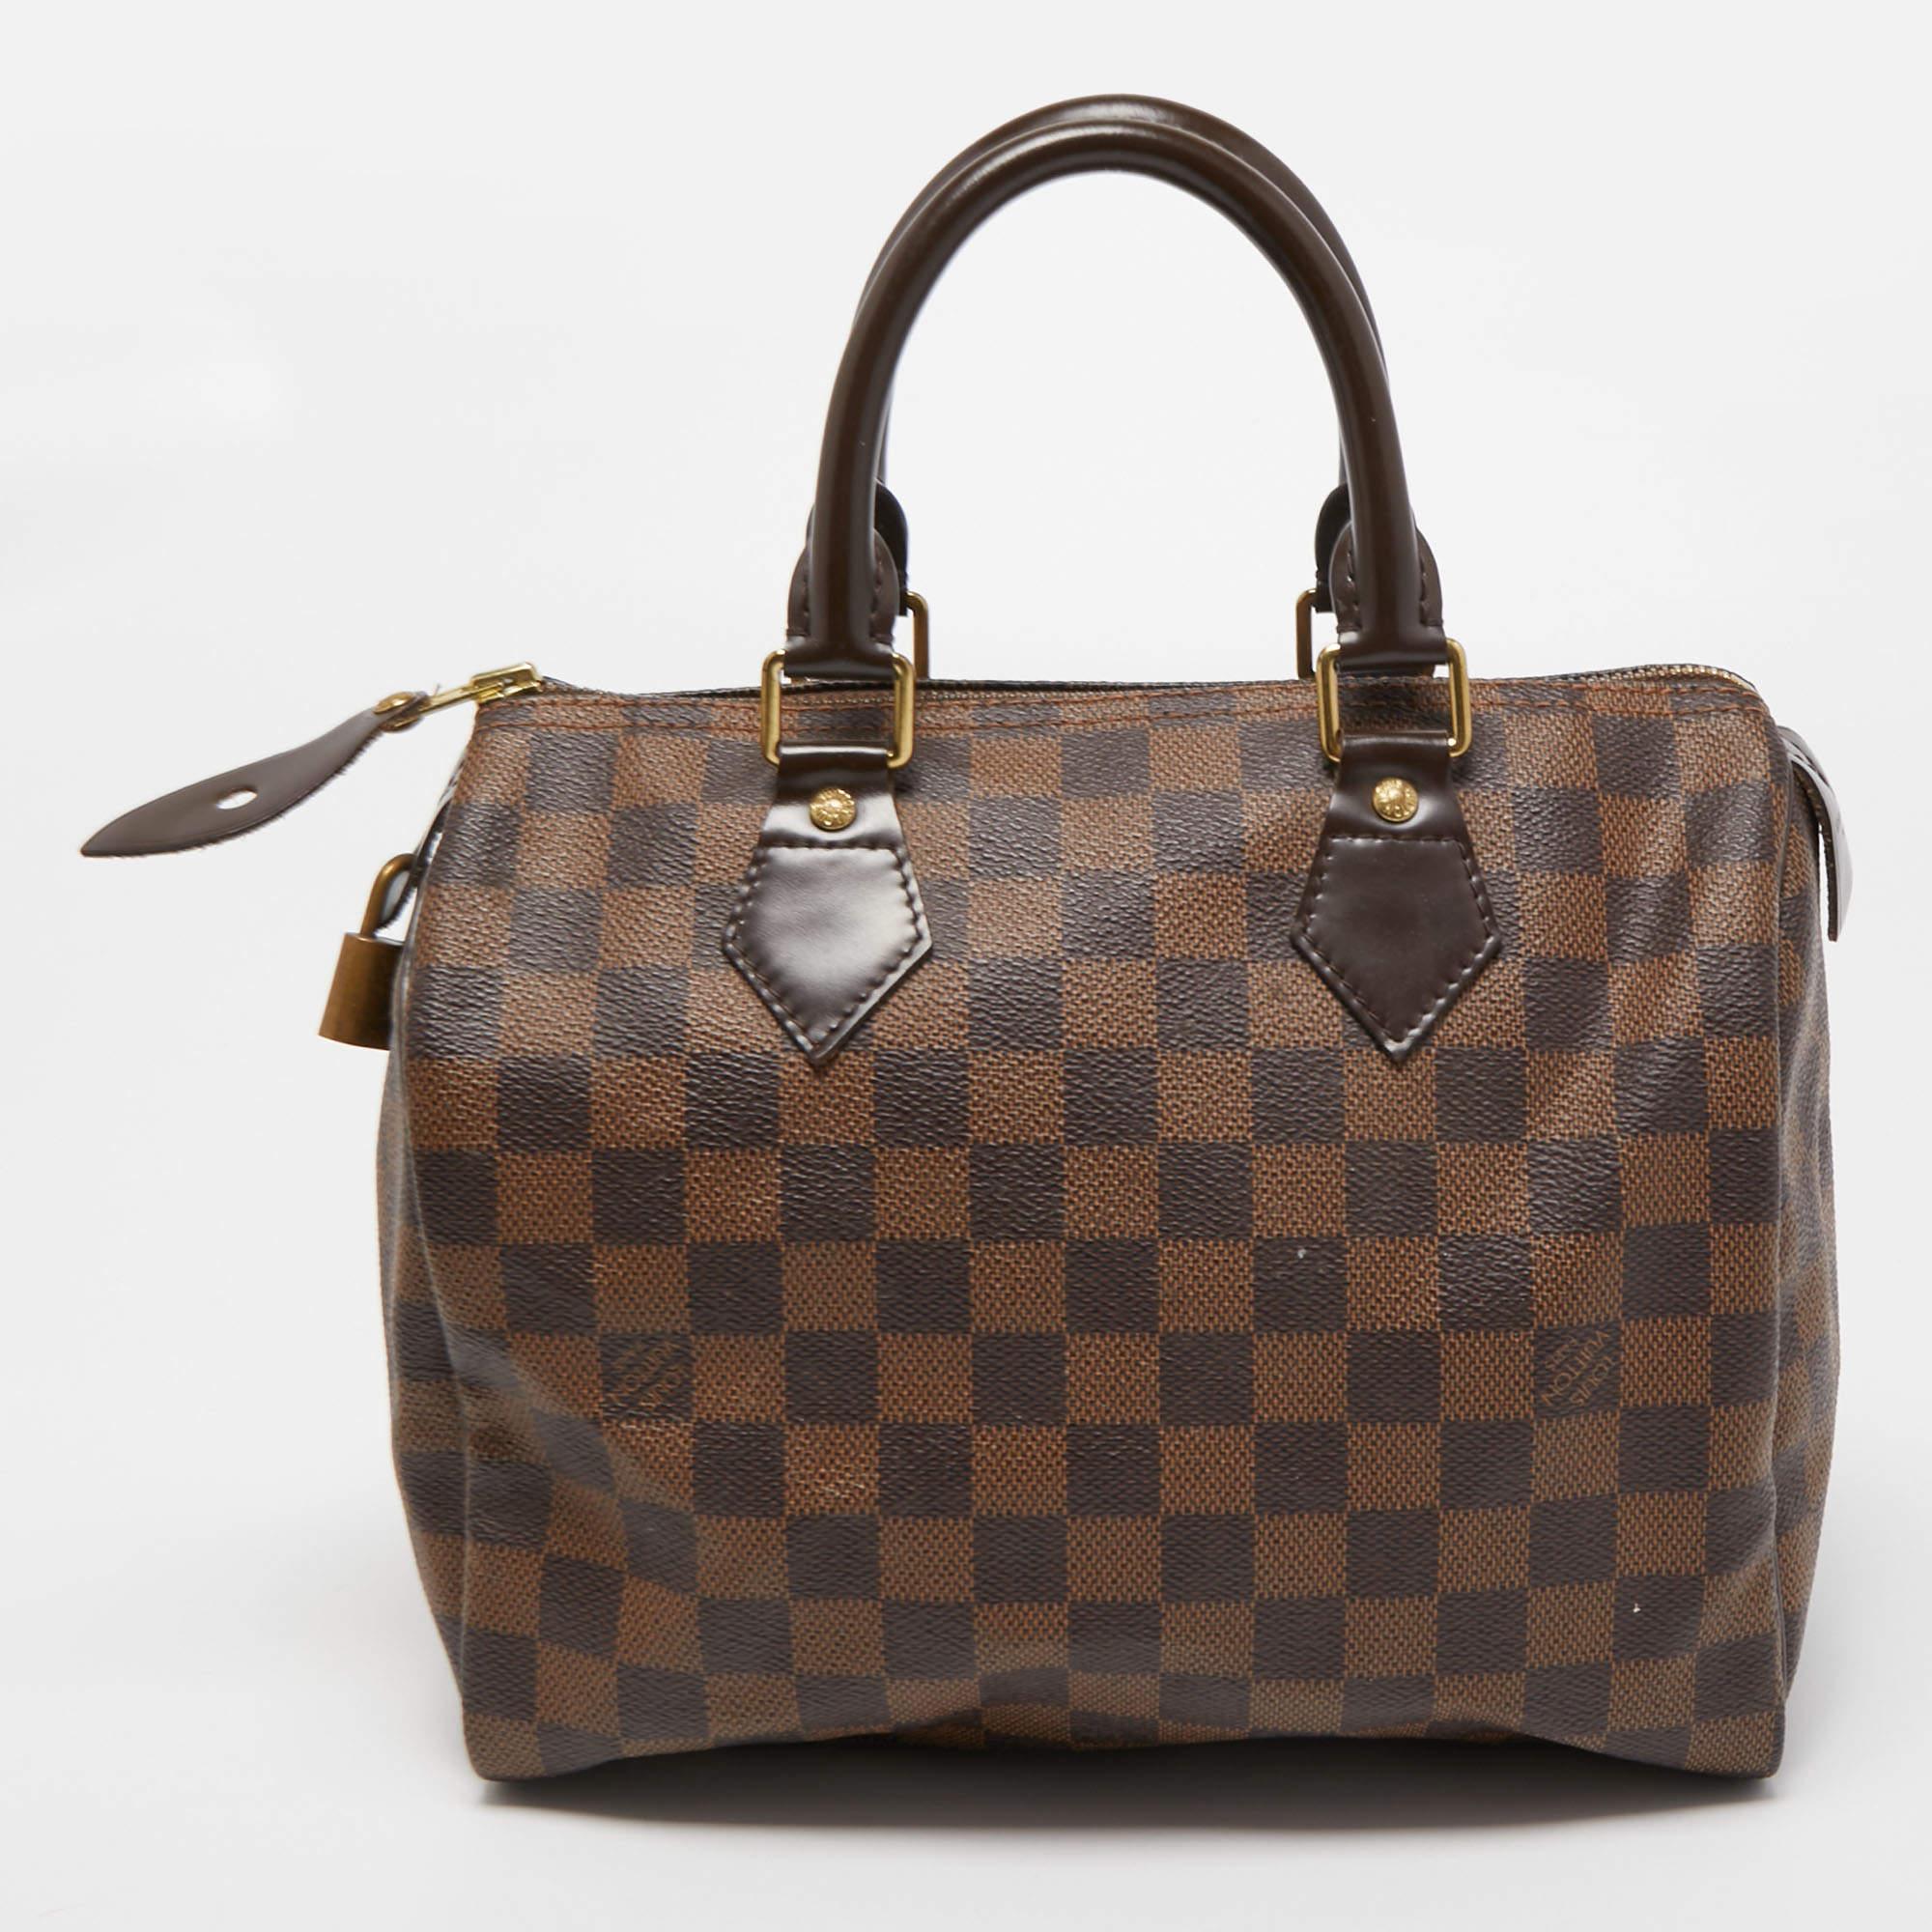 Created to provide you with everyday ease, this Louis Vuitton Speedy 25 bag features dual handles, a shoulder strap, and a roomy canvas-lined interior. The usage of the signature monogram canvas in its construction offers instant brand